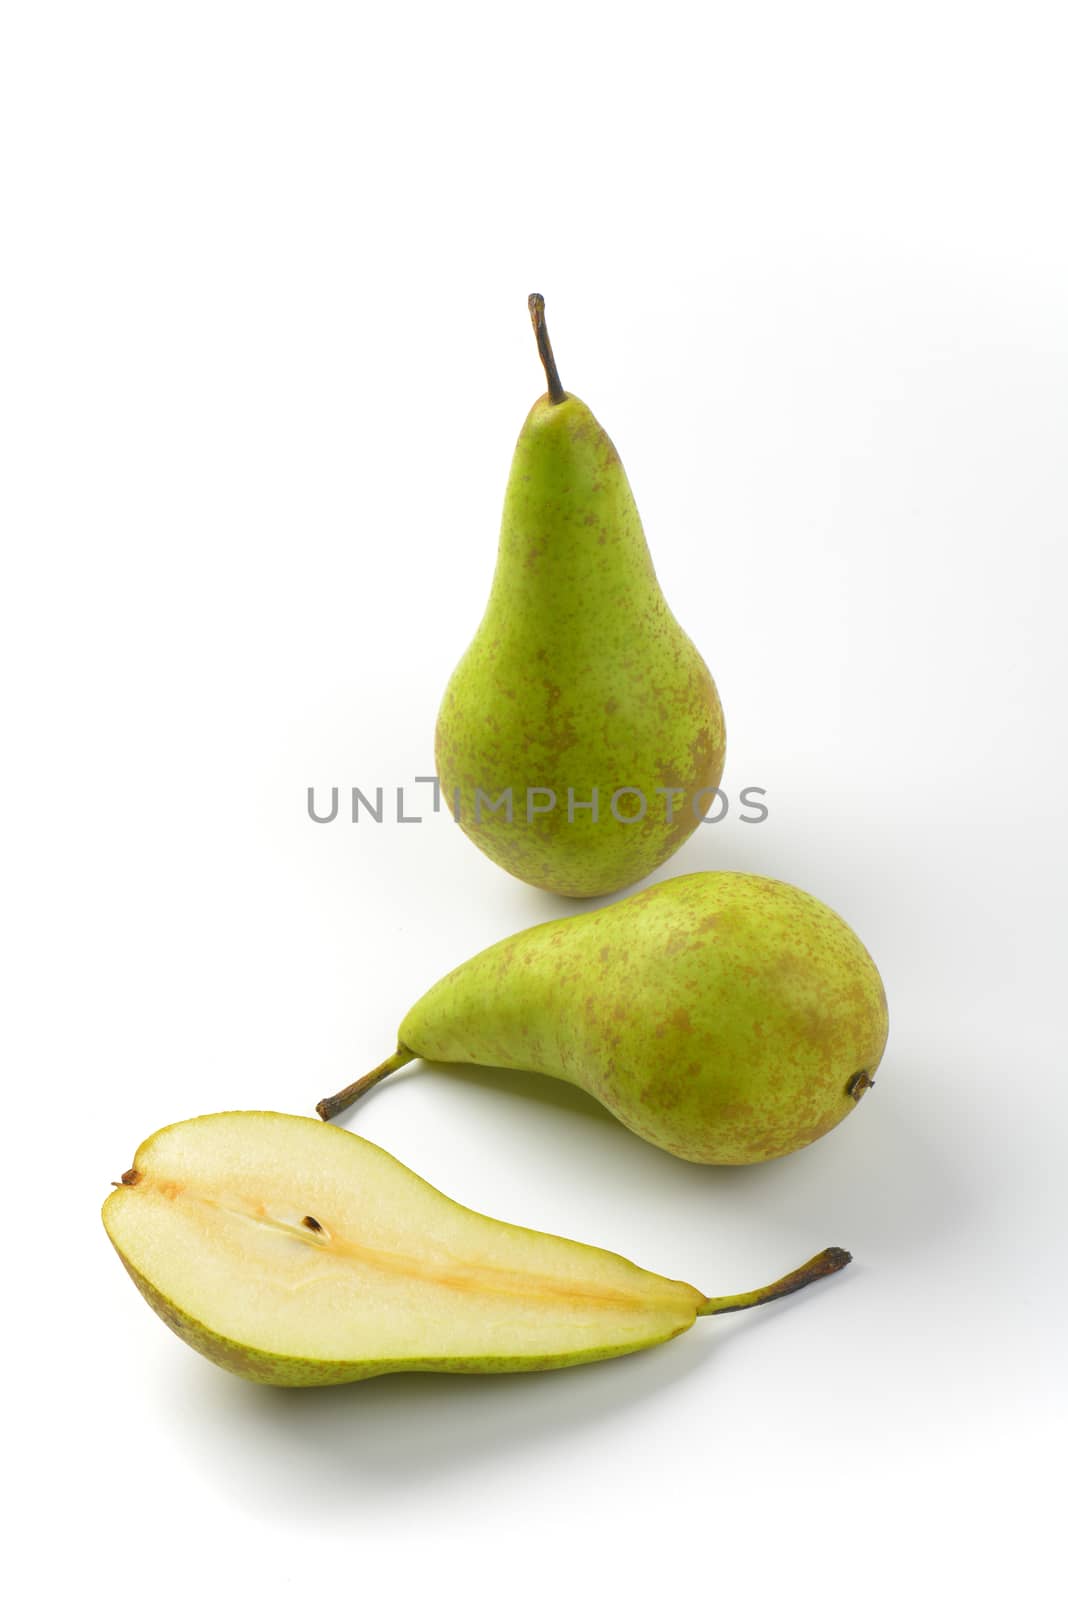 two whole fresh green pears and one half